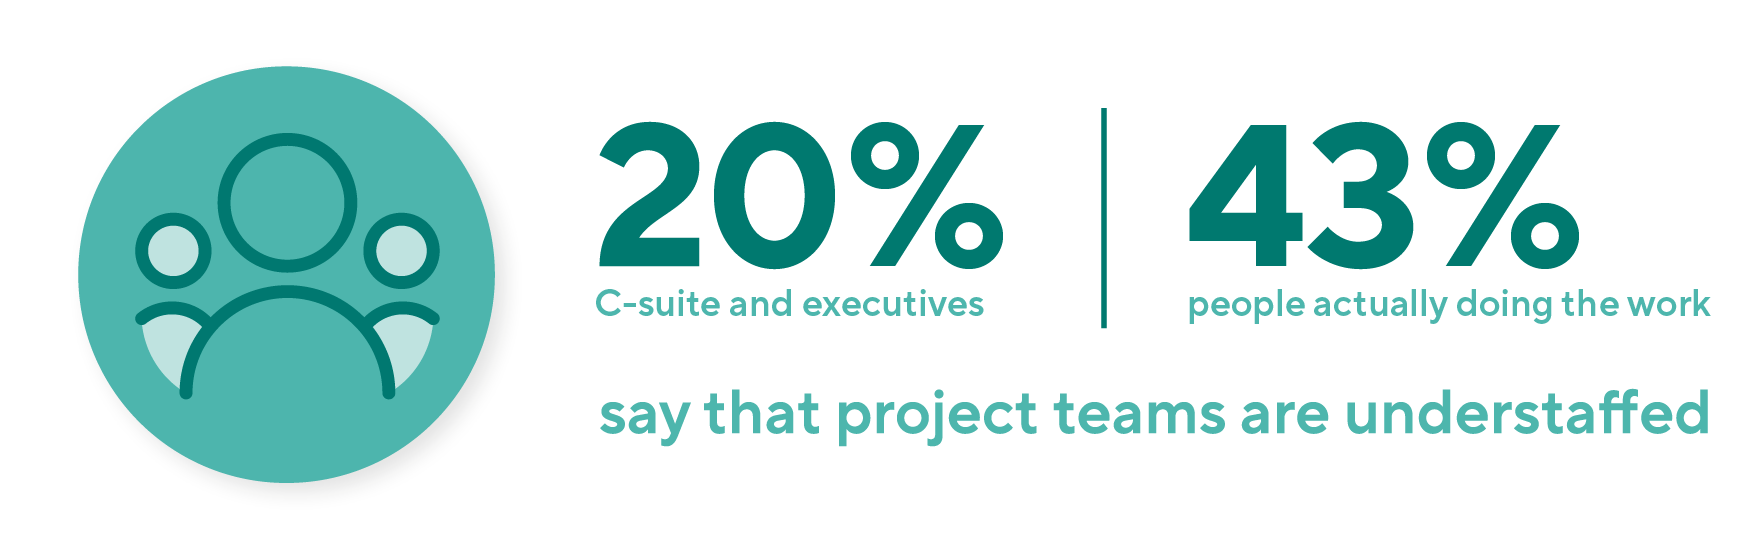 Infographic - only 20% of C-suite leaders and 43% of people actually doing the work feel that project teams are typically understaffed